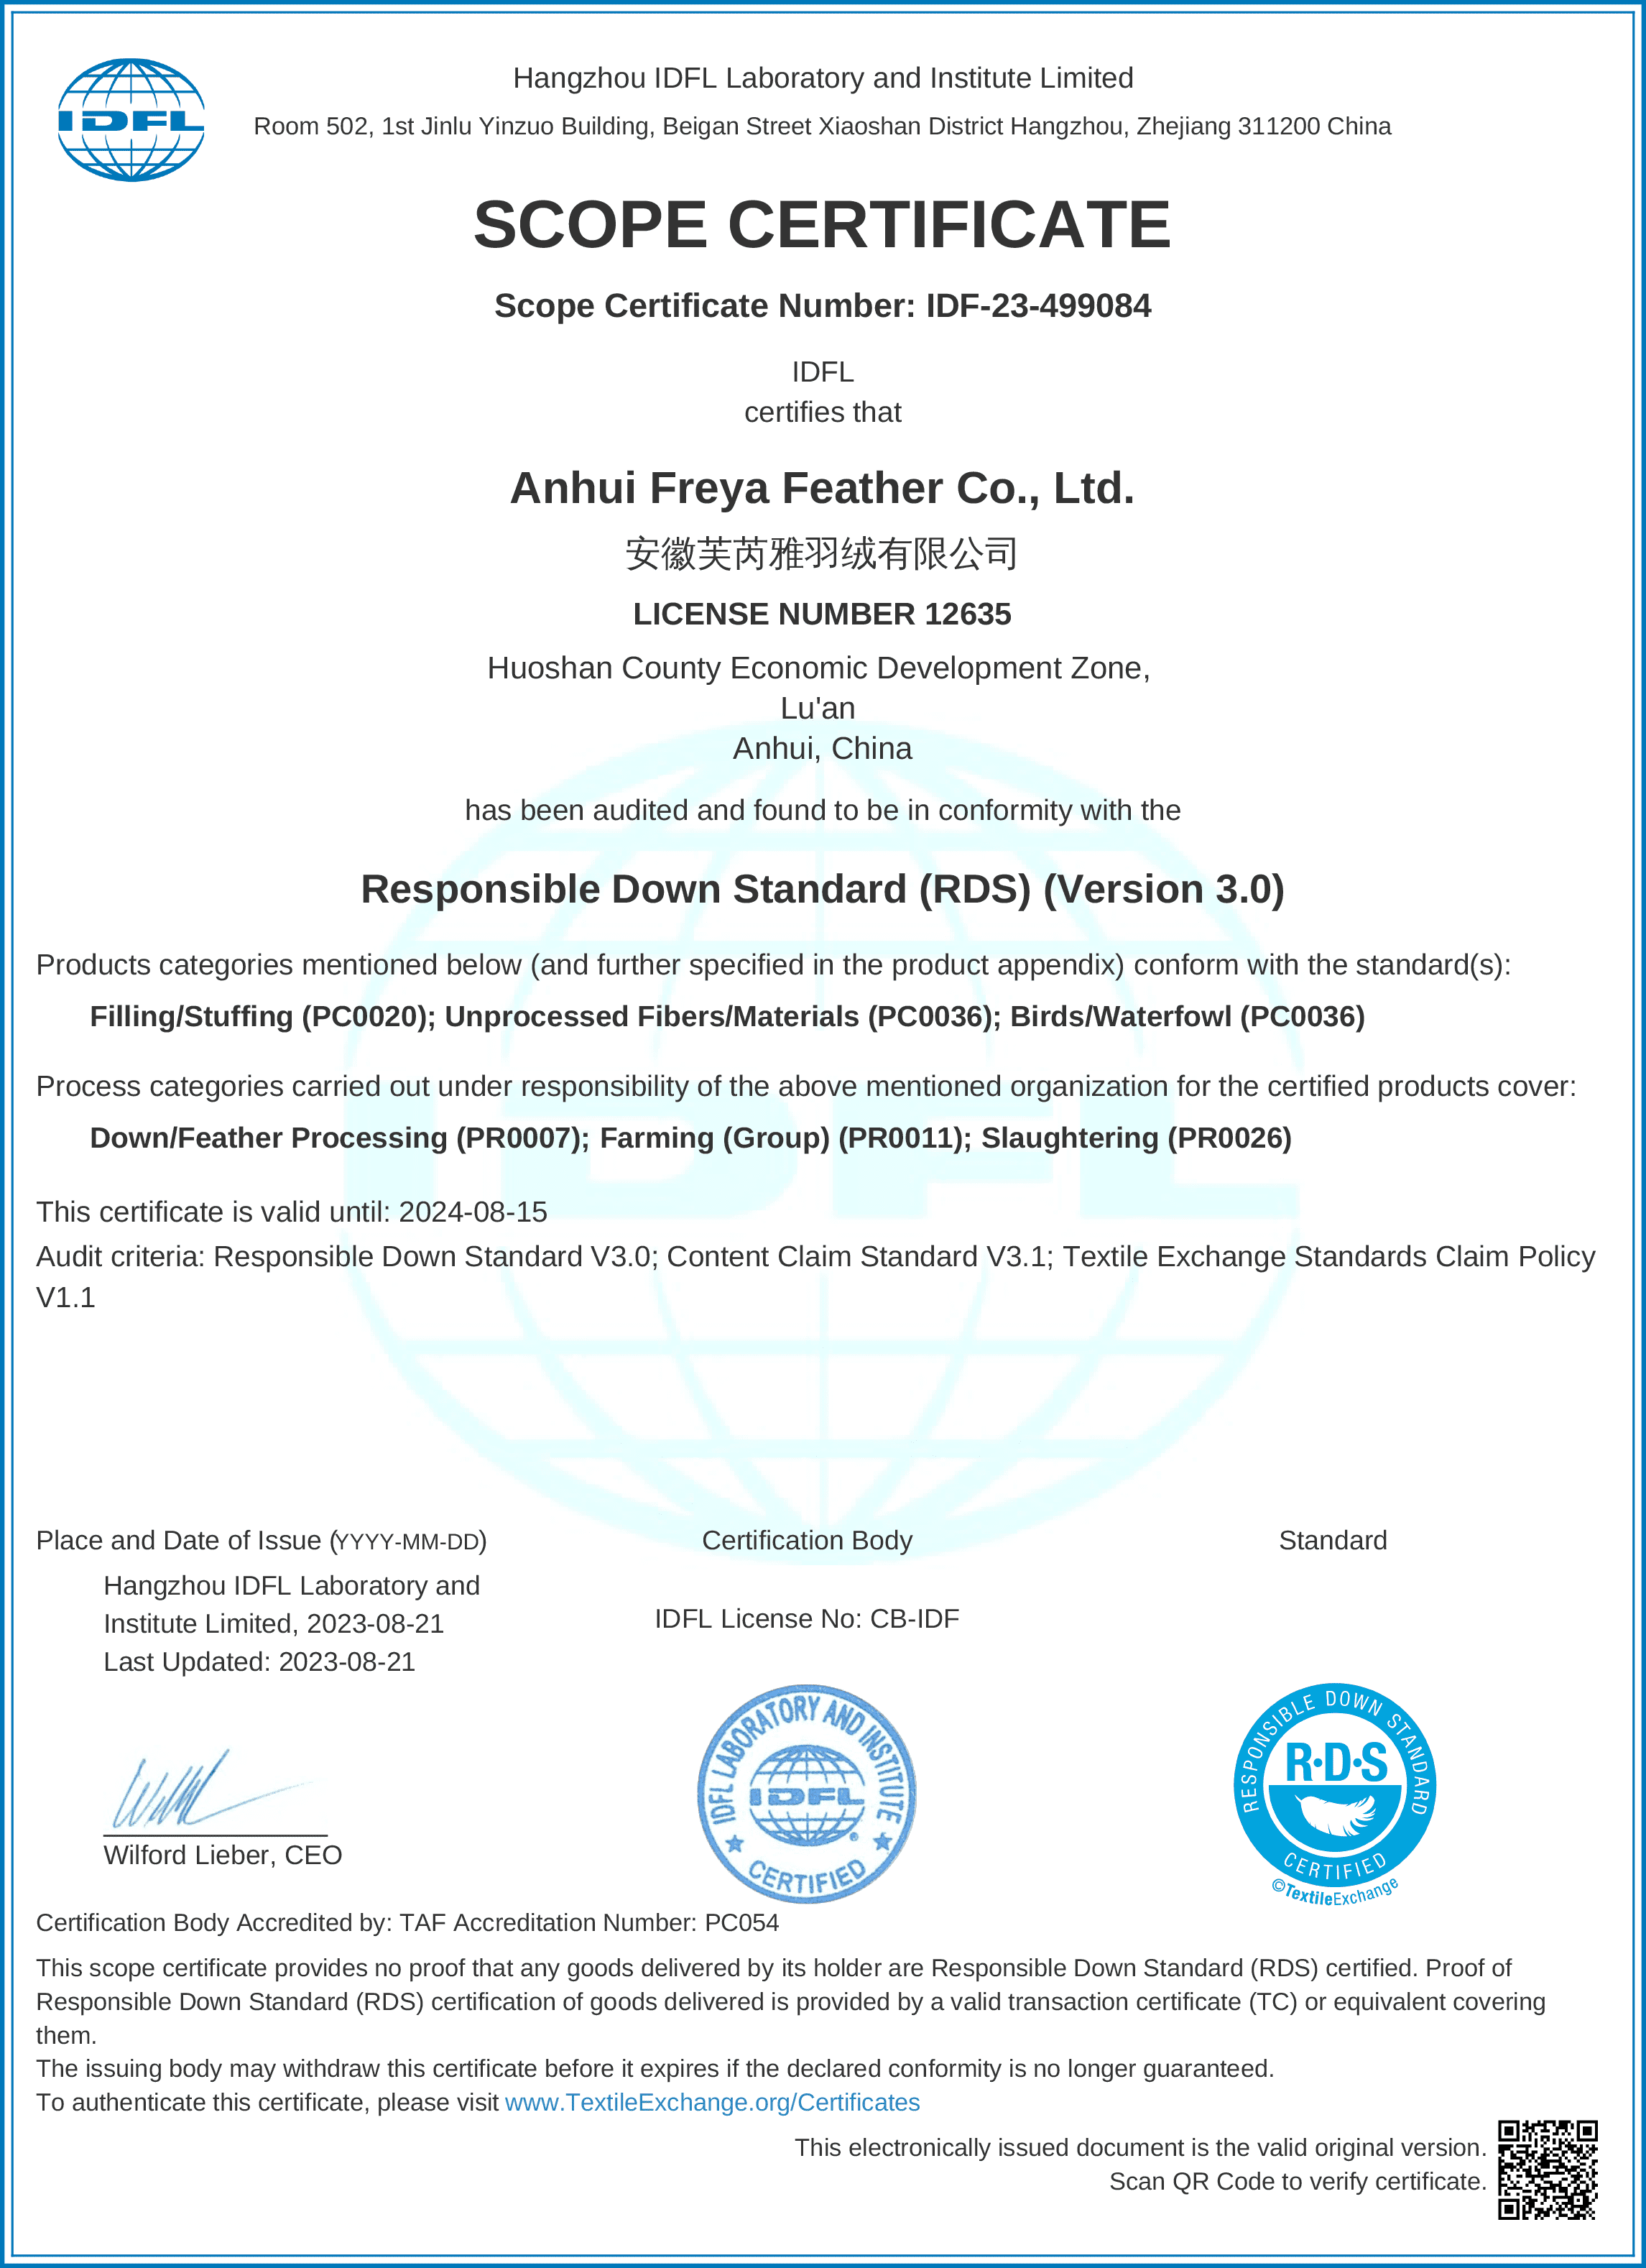 RDS certificate